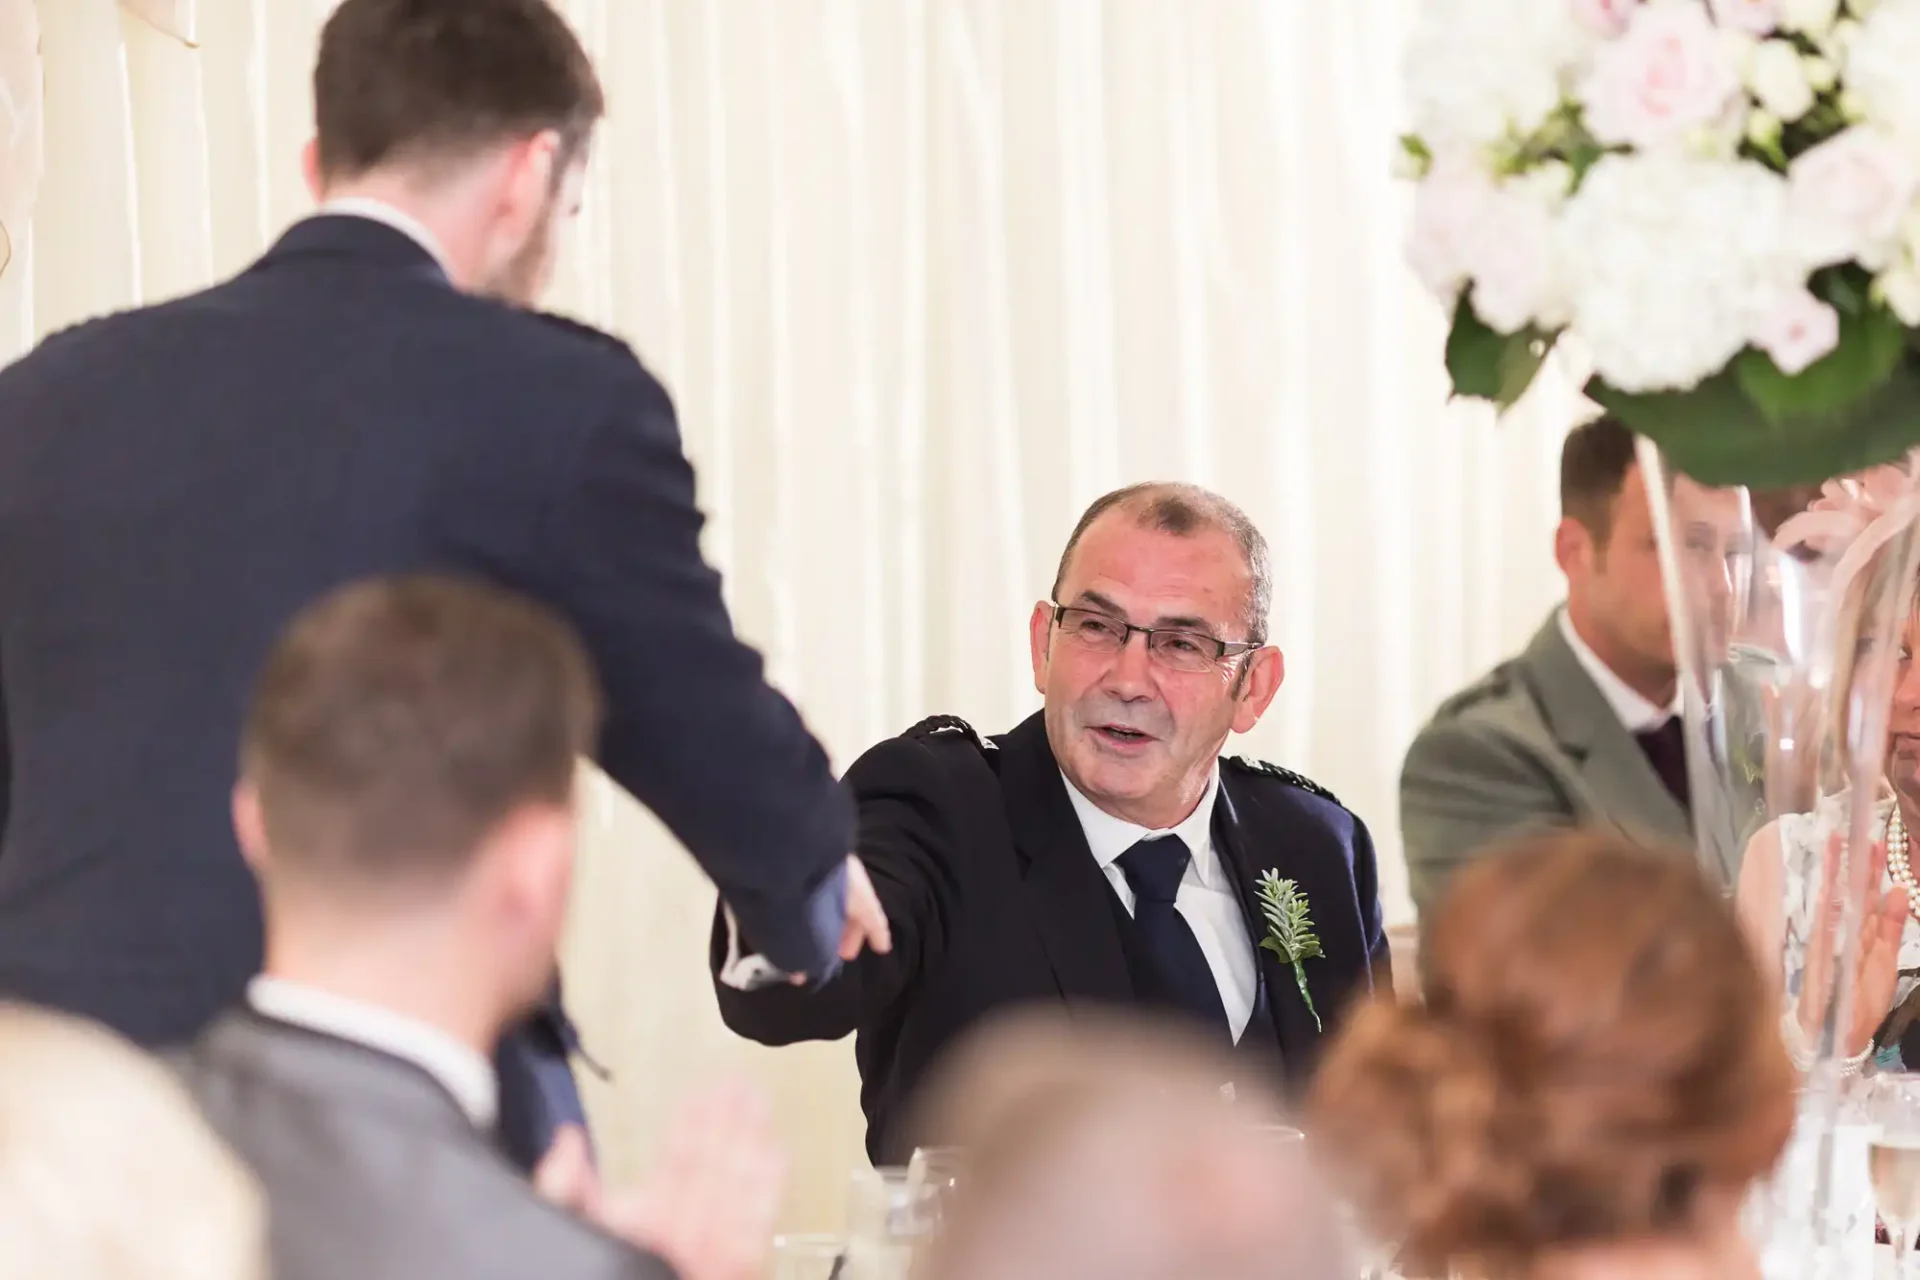 A man at a wedding reception extends his hand for a handshake, smiling, as guests around the table look on.